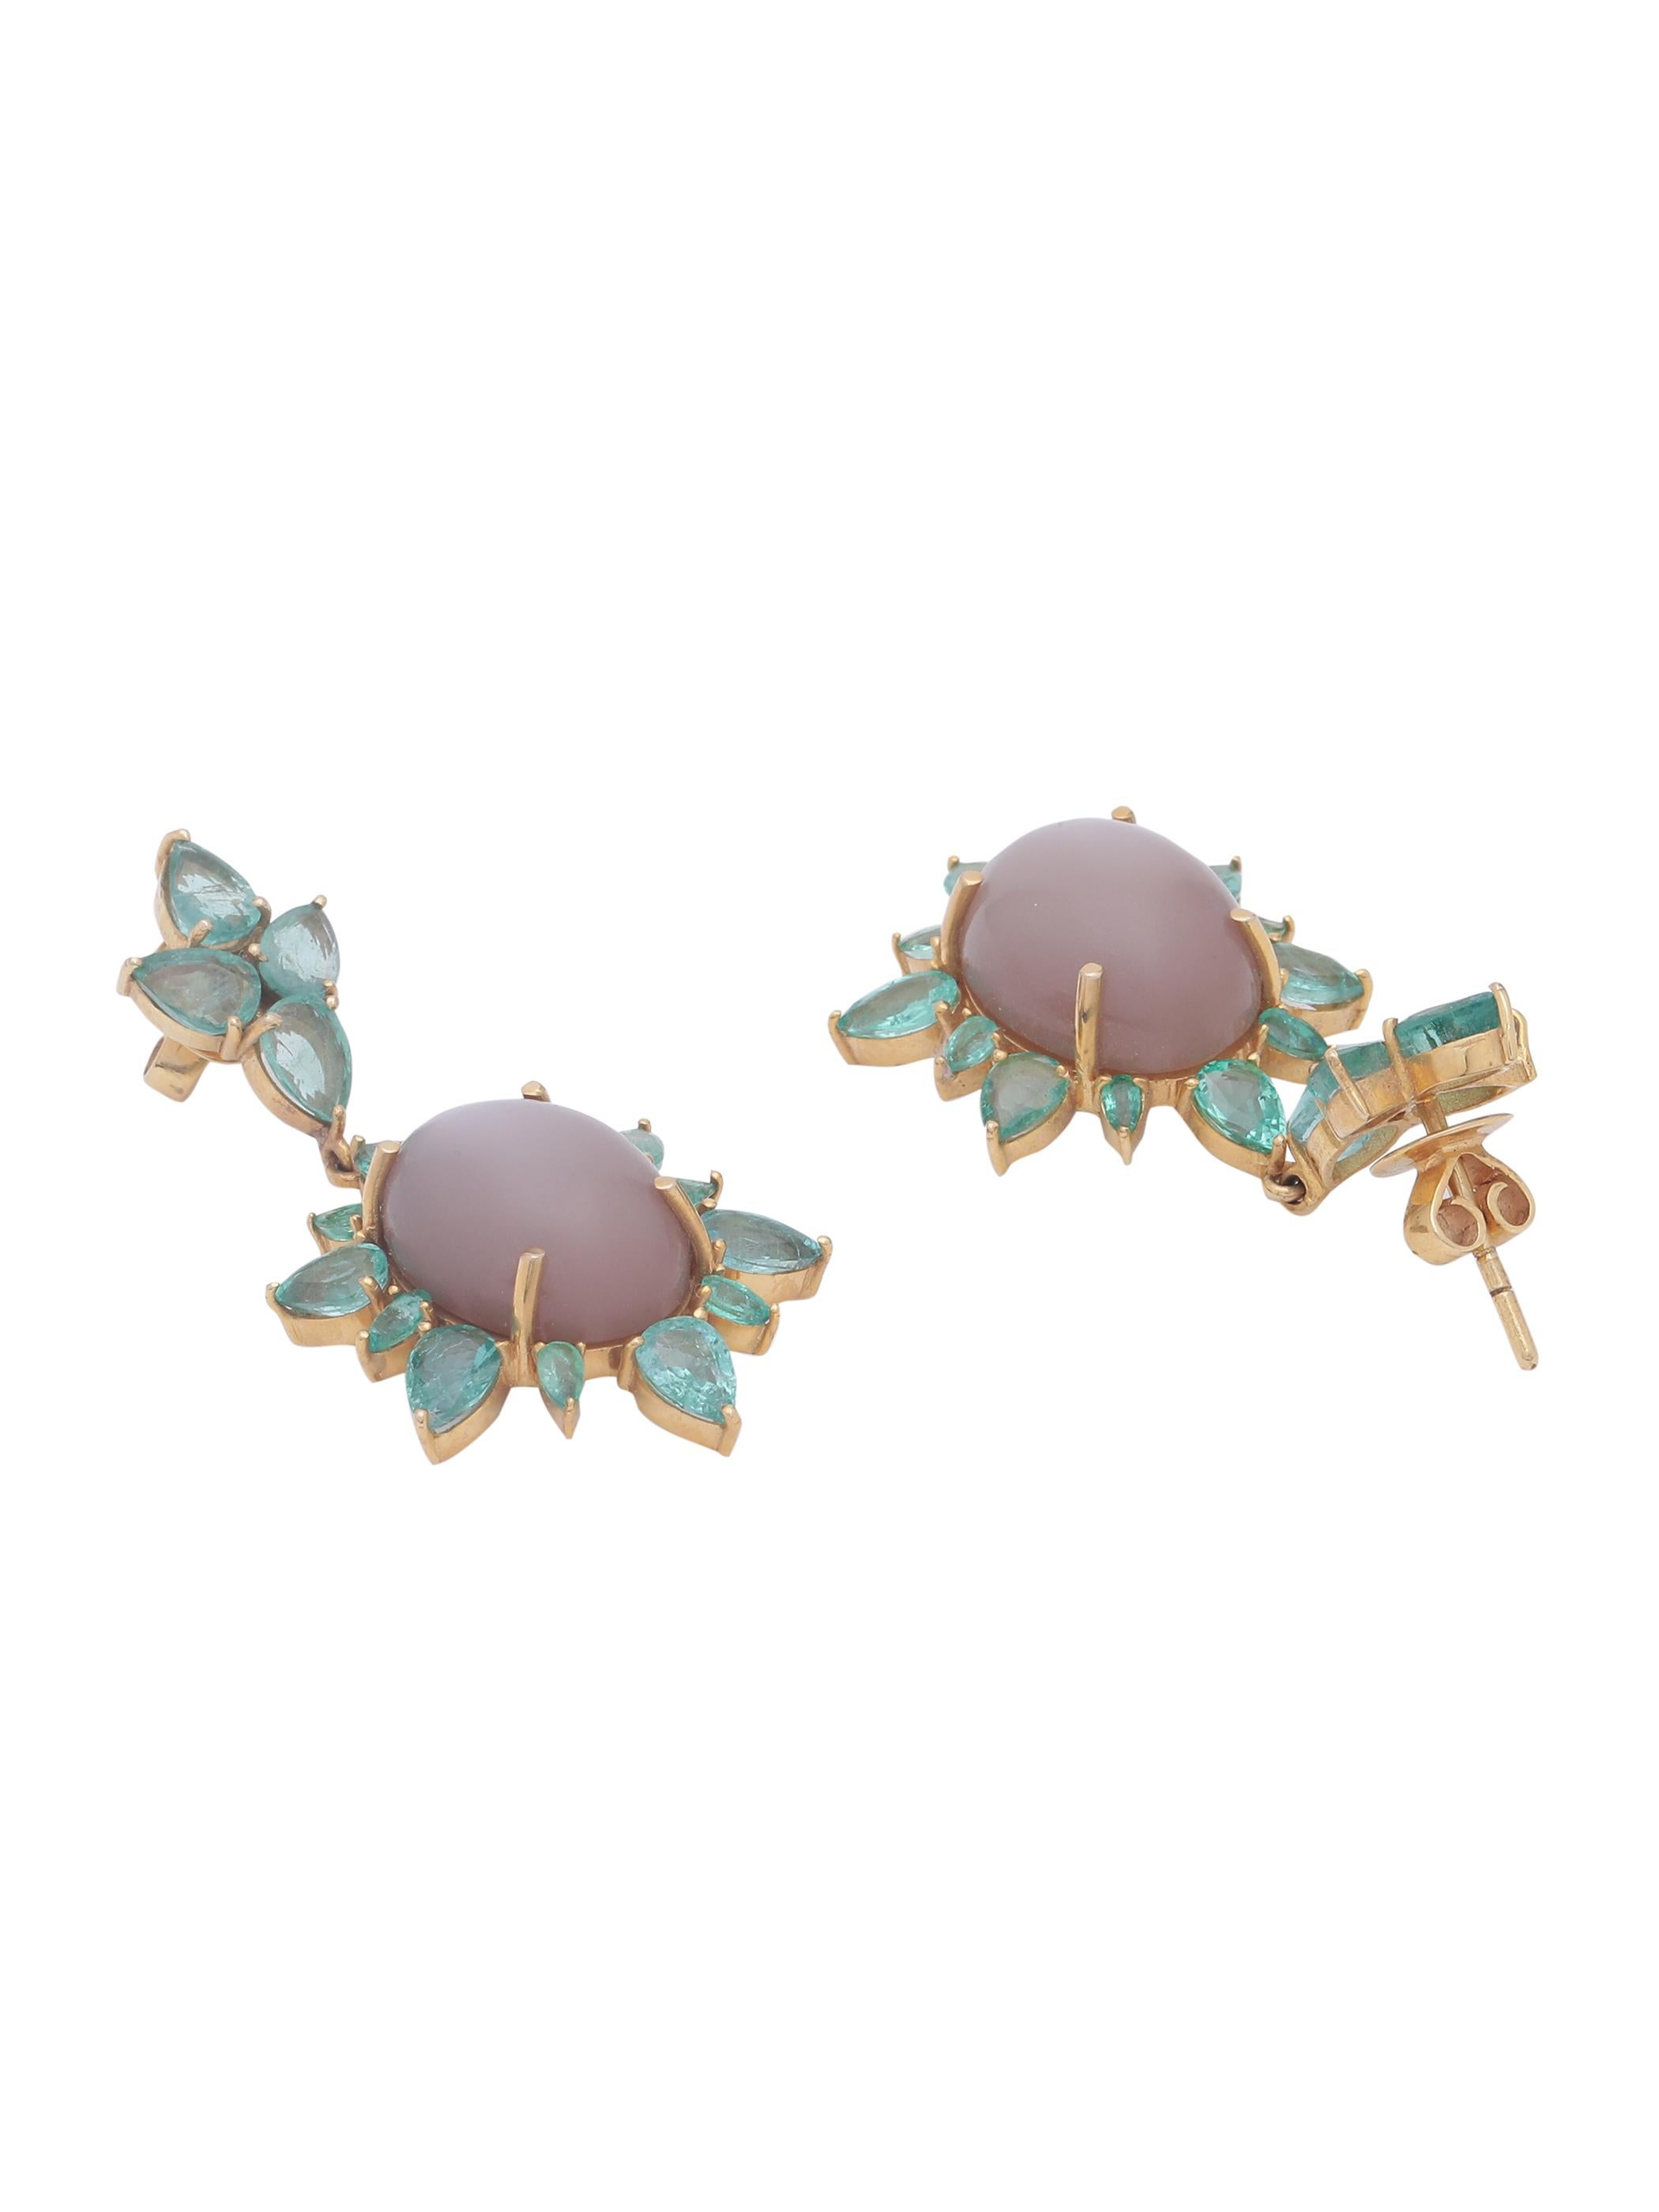 A unique pair of earrings with Brown chocolate Moonstone cabochon pair set with light colour Emerald pears all around. The combination of the Opaque Moonstone and the transparent Emeralds give the whole earring a vibrant look.
The earring is